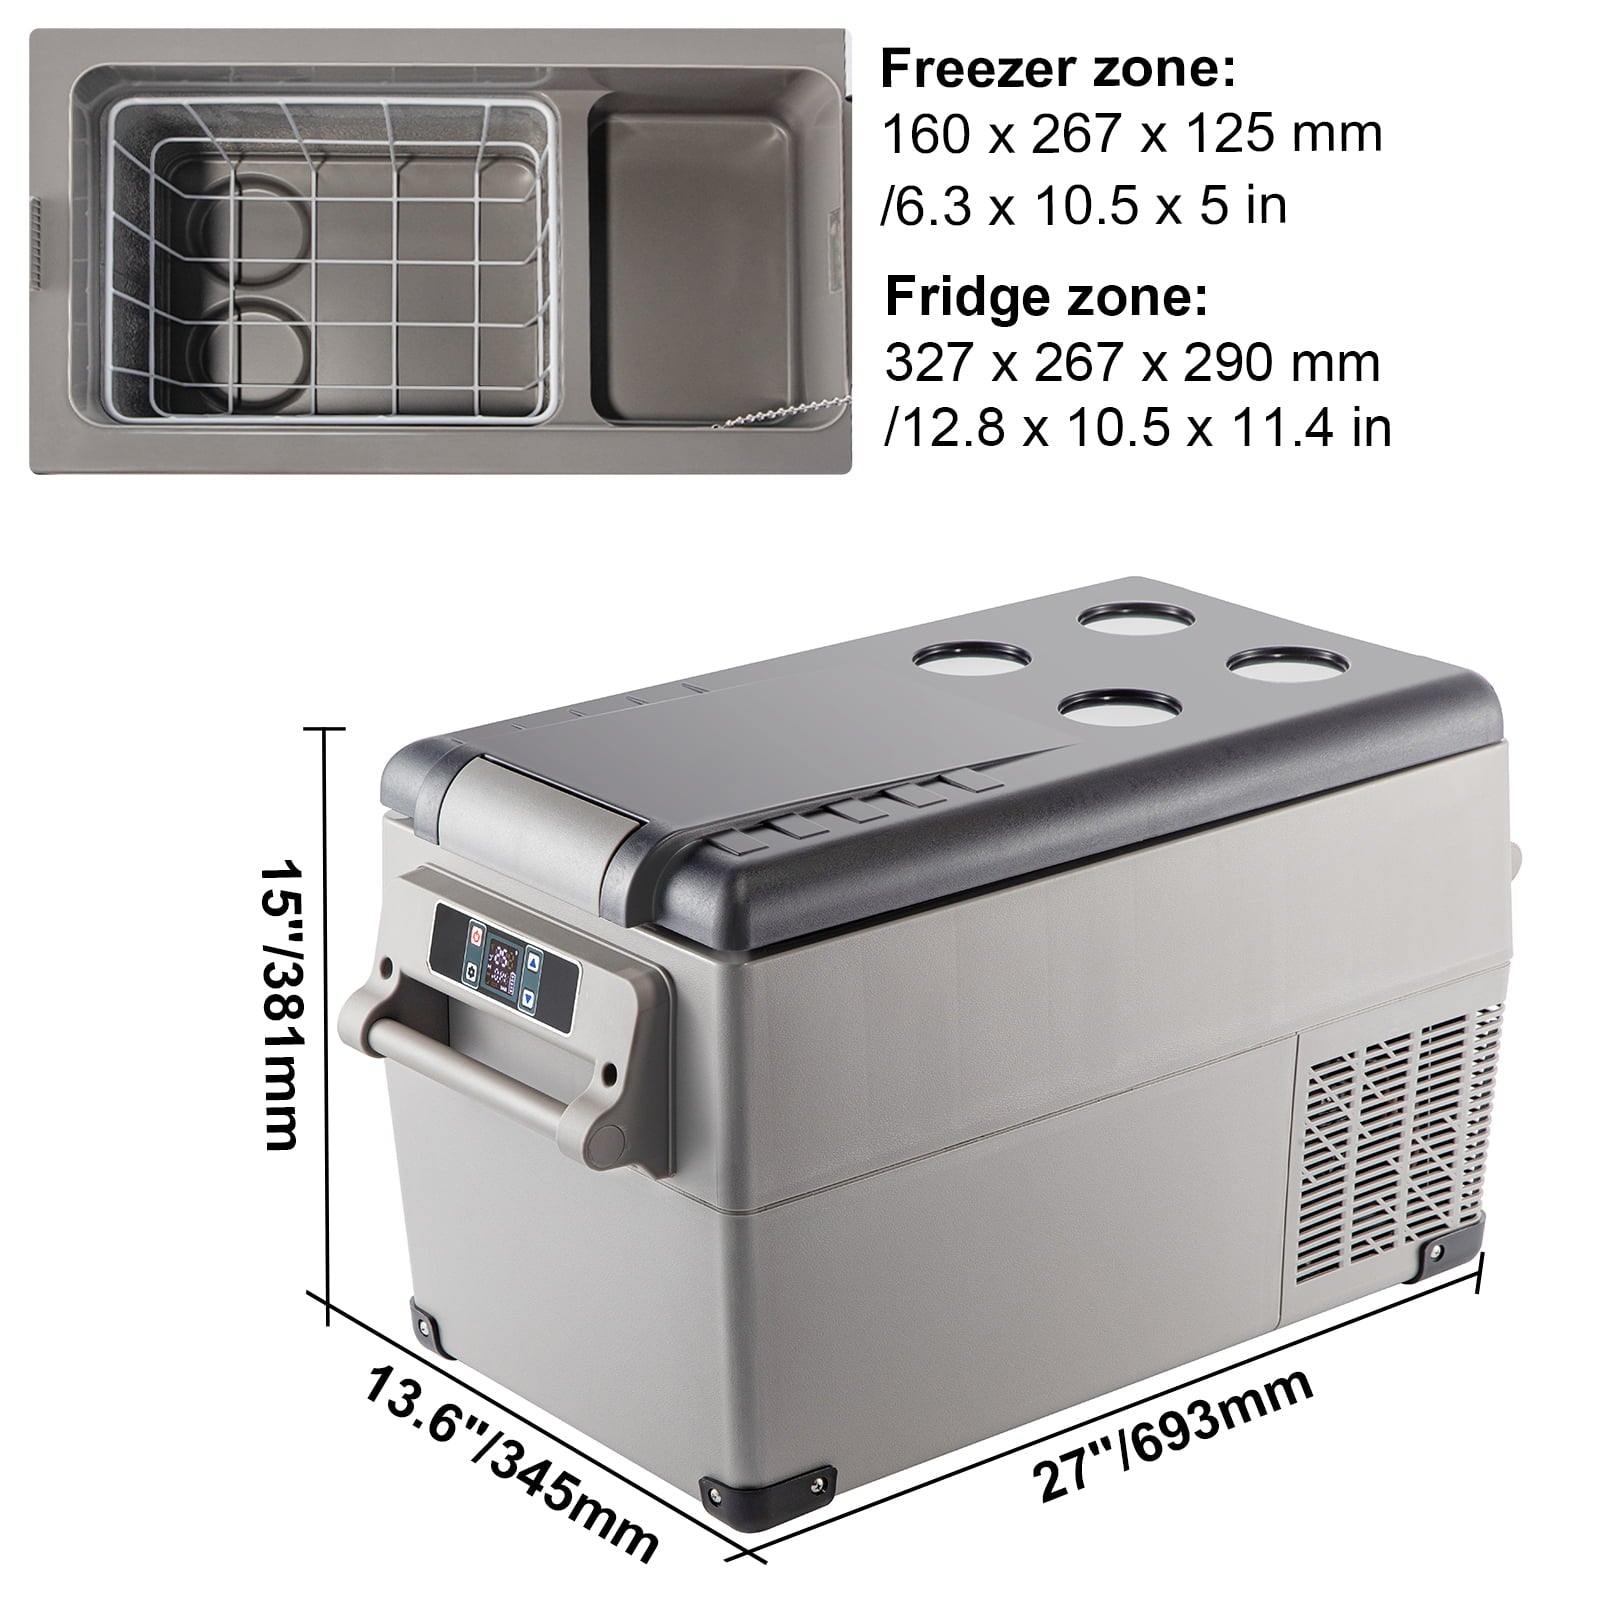 VEVORbrand 35L Portable Car Refrigerator 37 Quart Compact Rv Fridge 12/24V Dc and 110-240V Ac Vehicle Car Truck Boat Mini Electric Cooler For Driving Travel Fishing Outdoor And Home Use -4°F-50°F